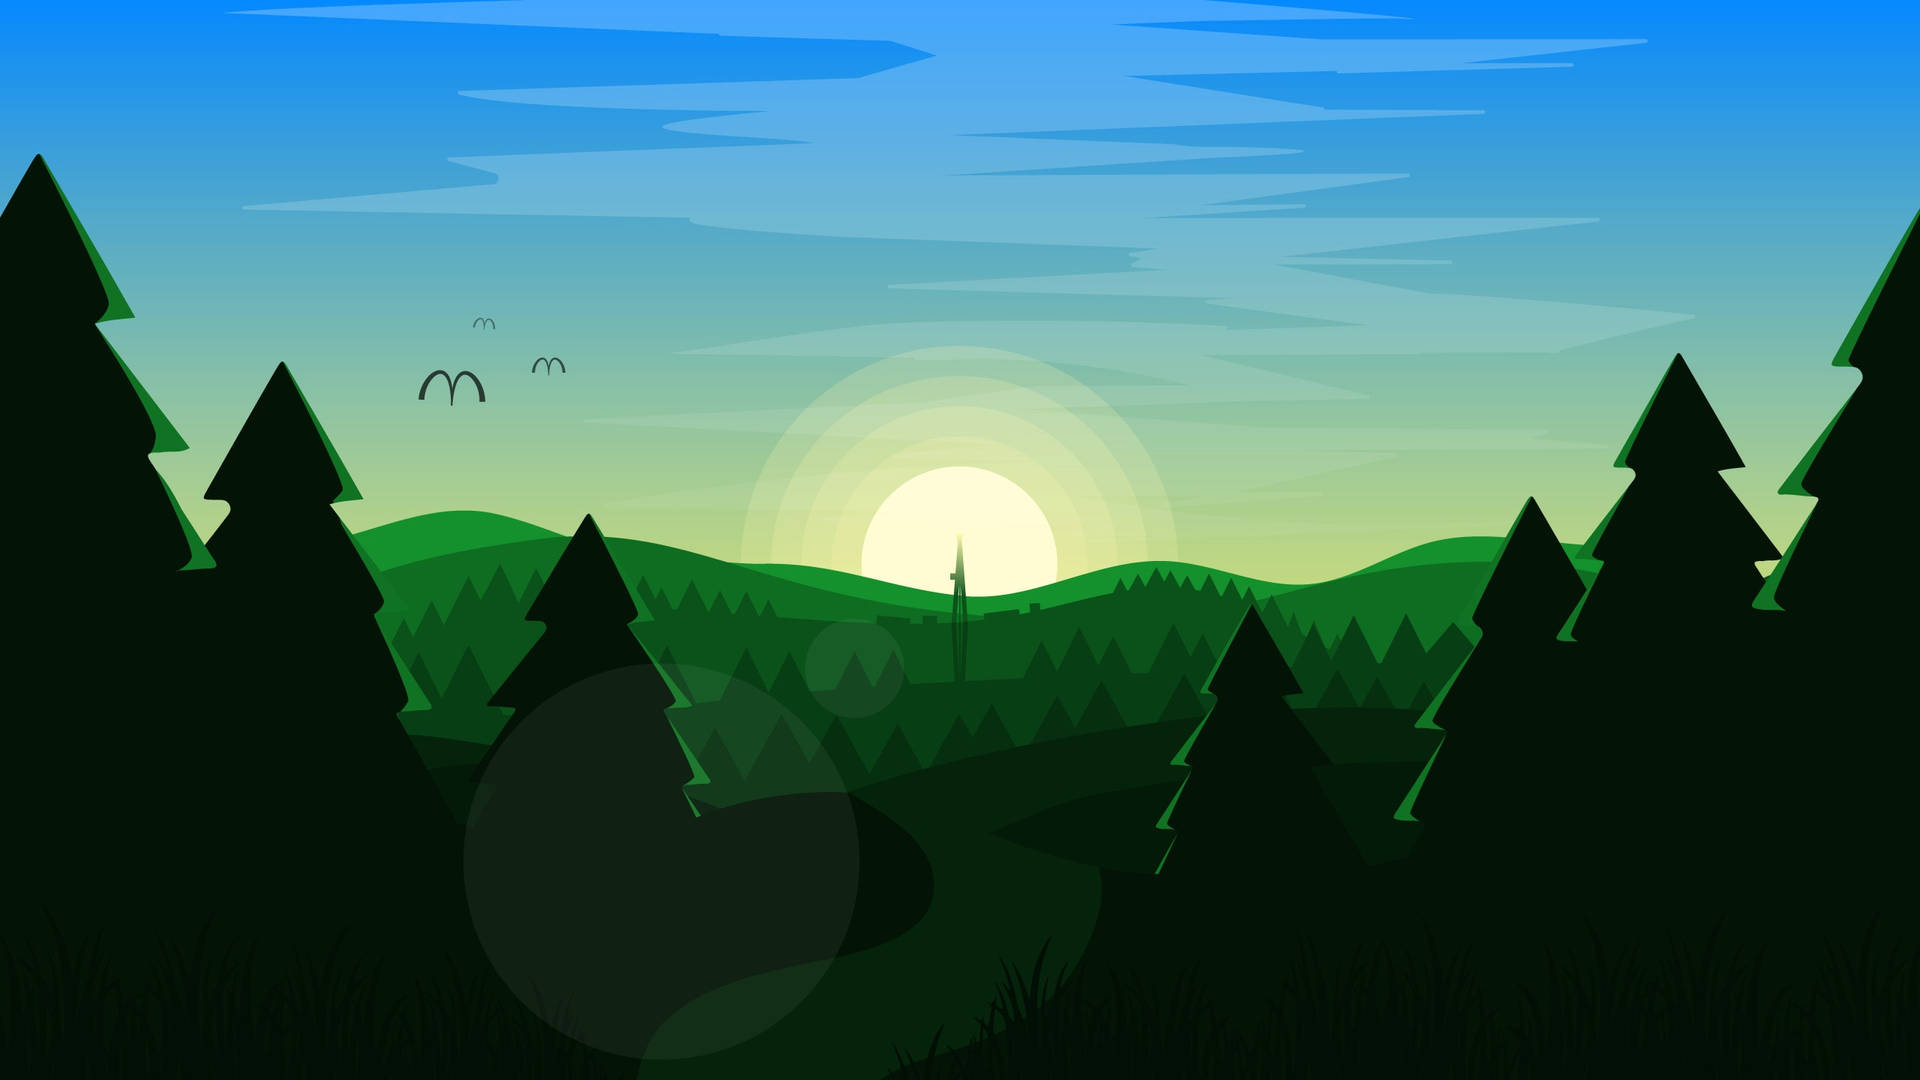 Simple Clean Forest Graphic Art Background